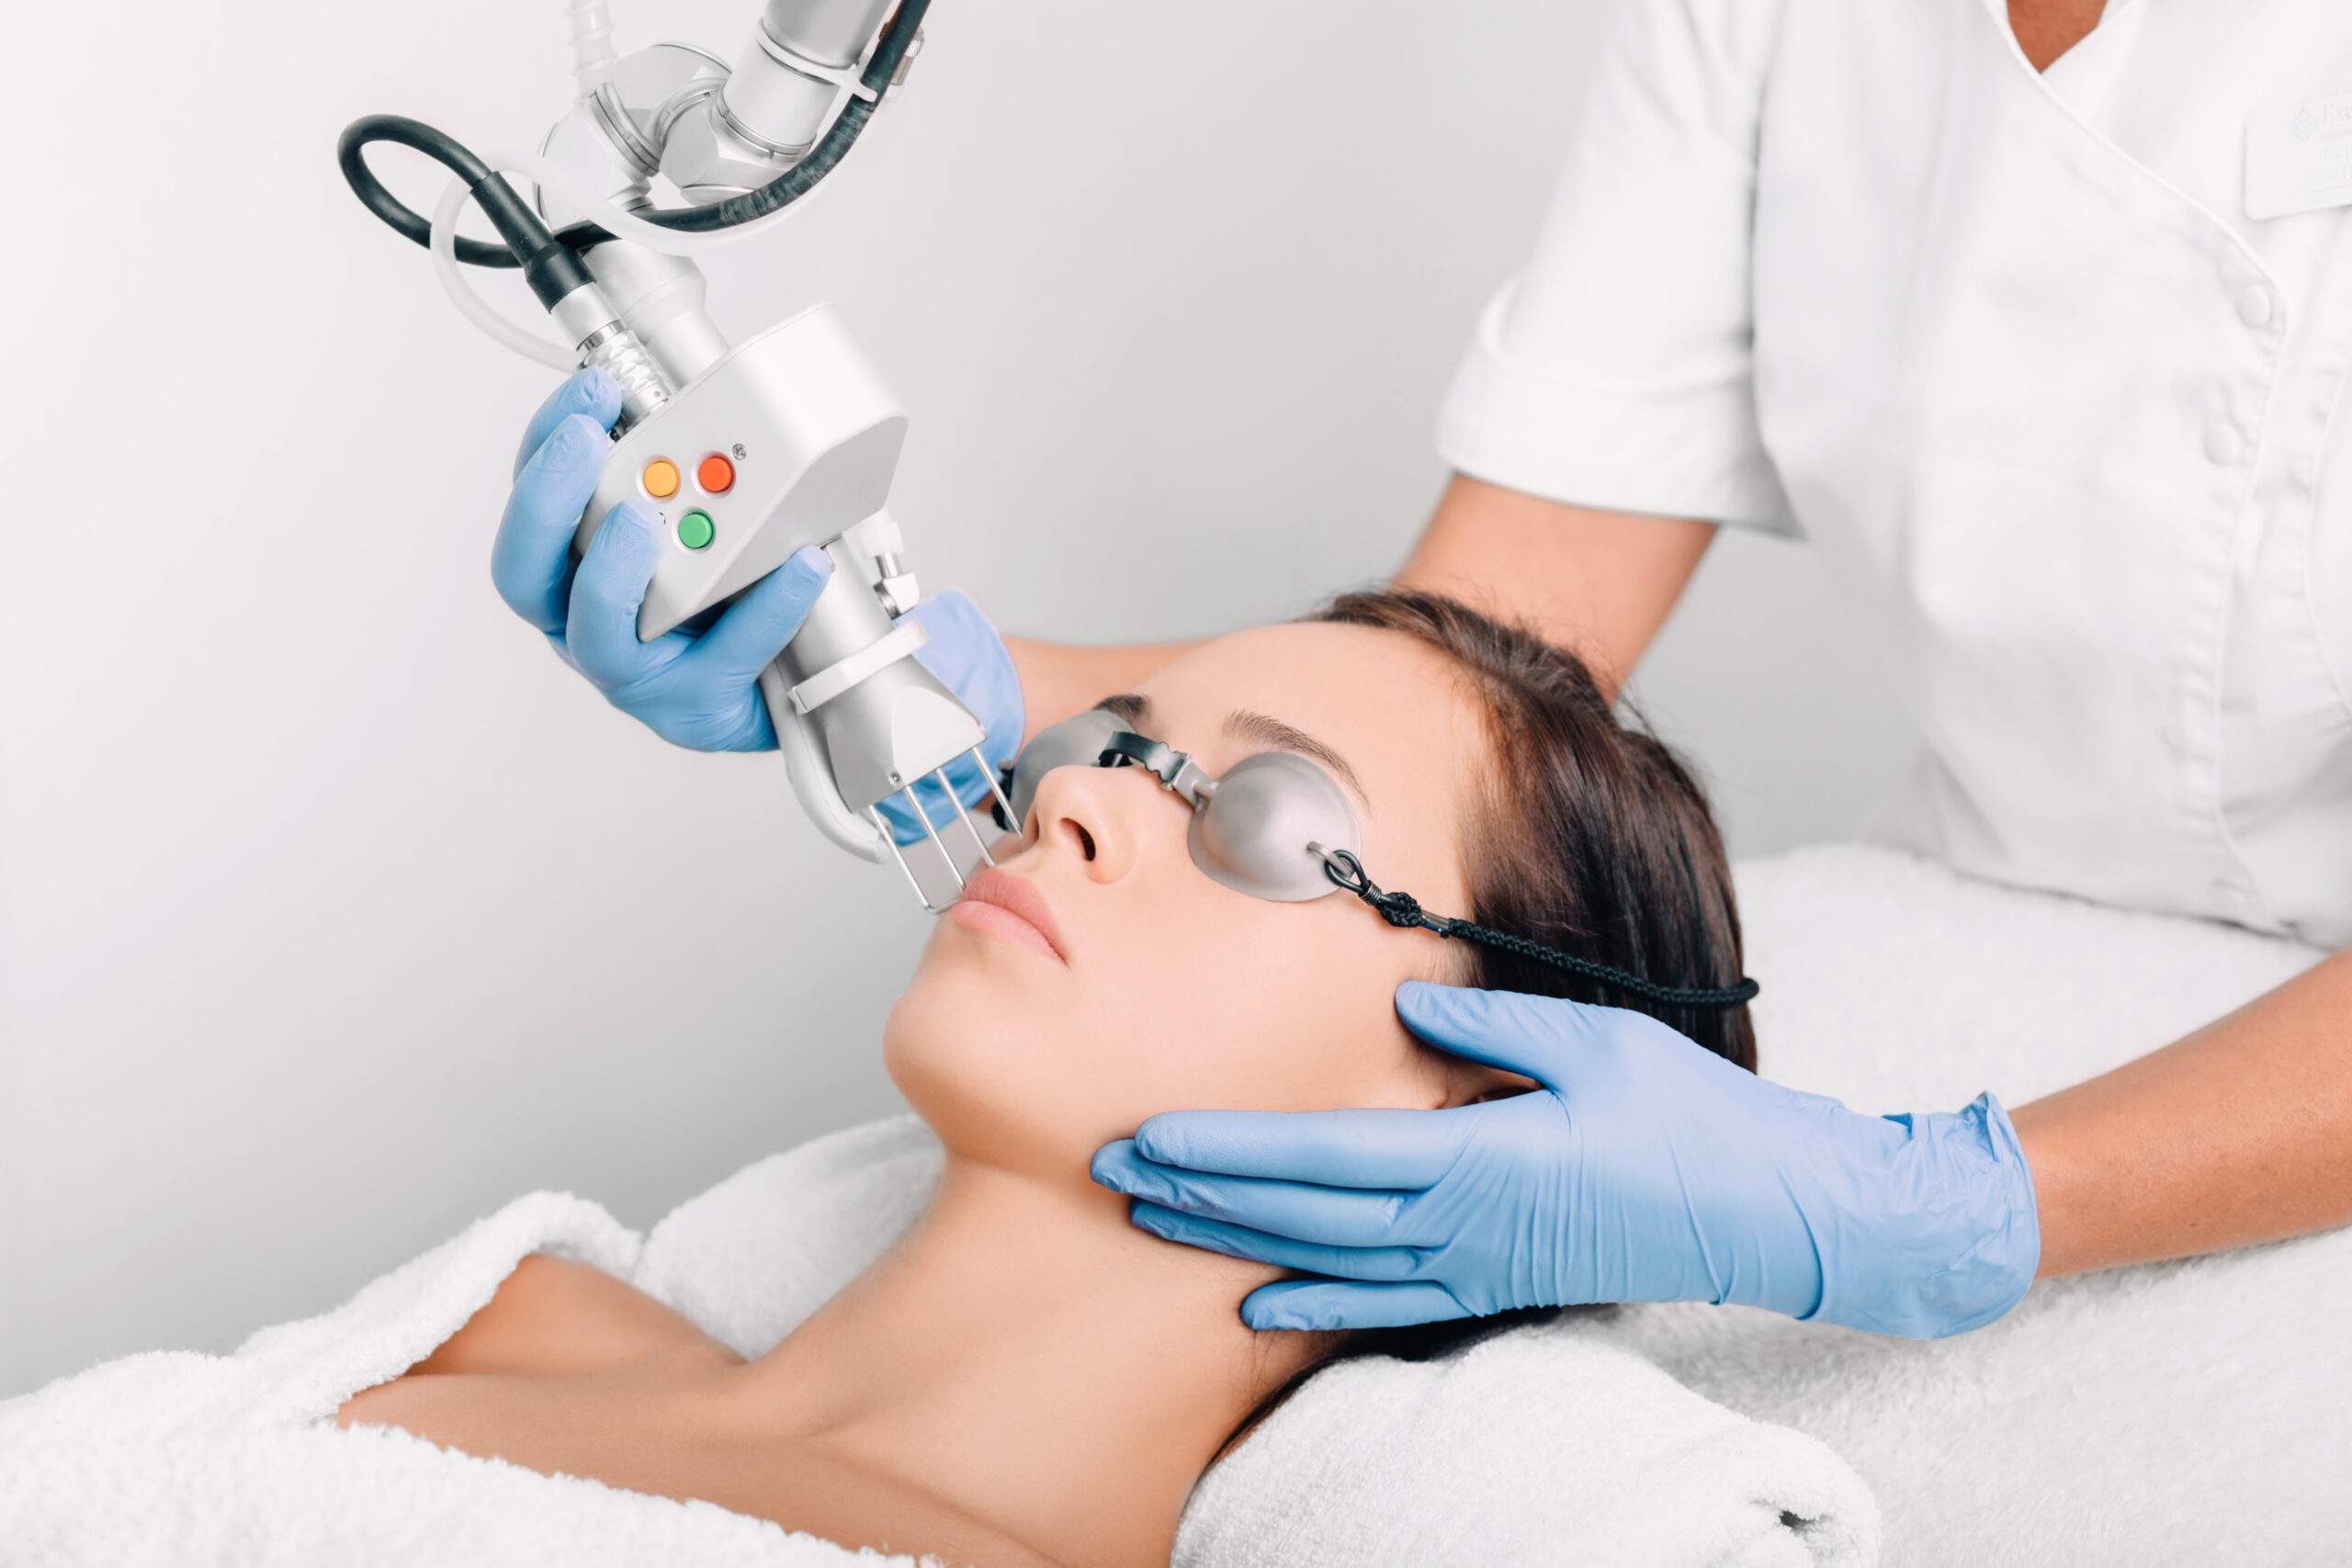 laser hair removal | lady getting ablative procedure 